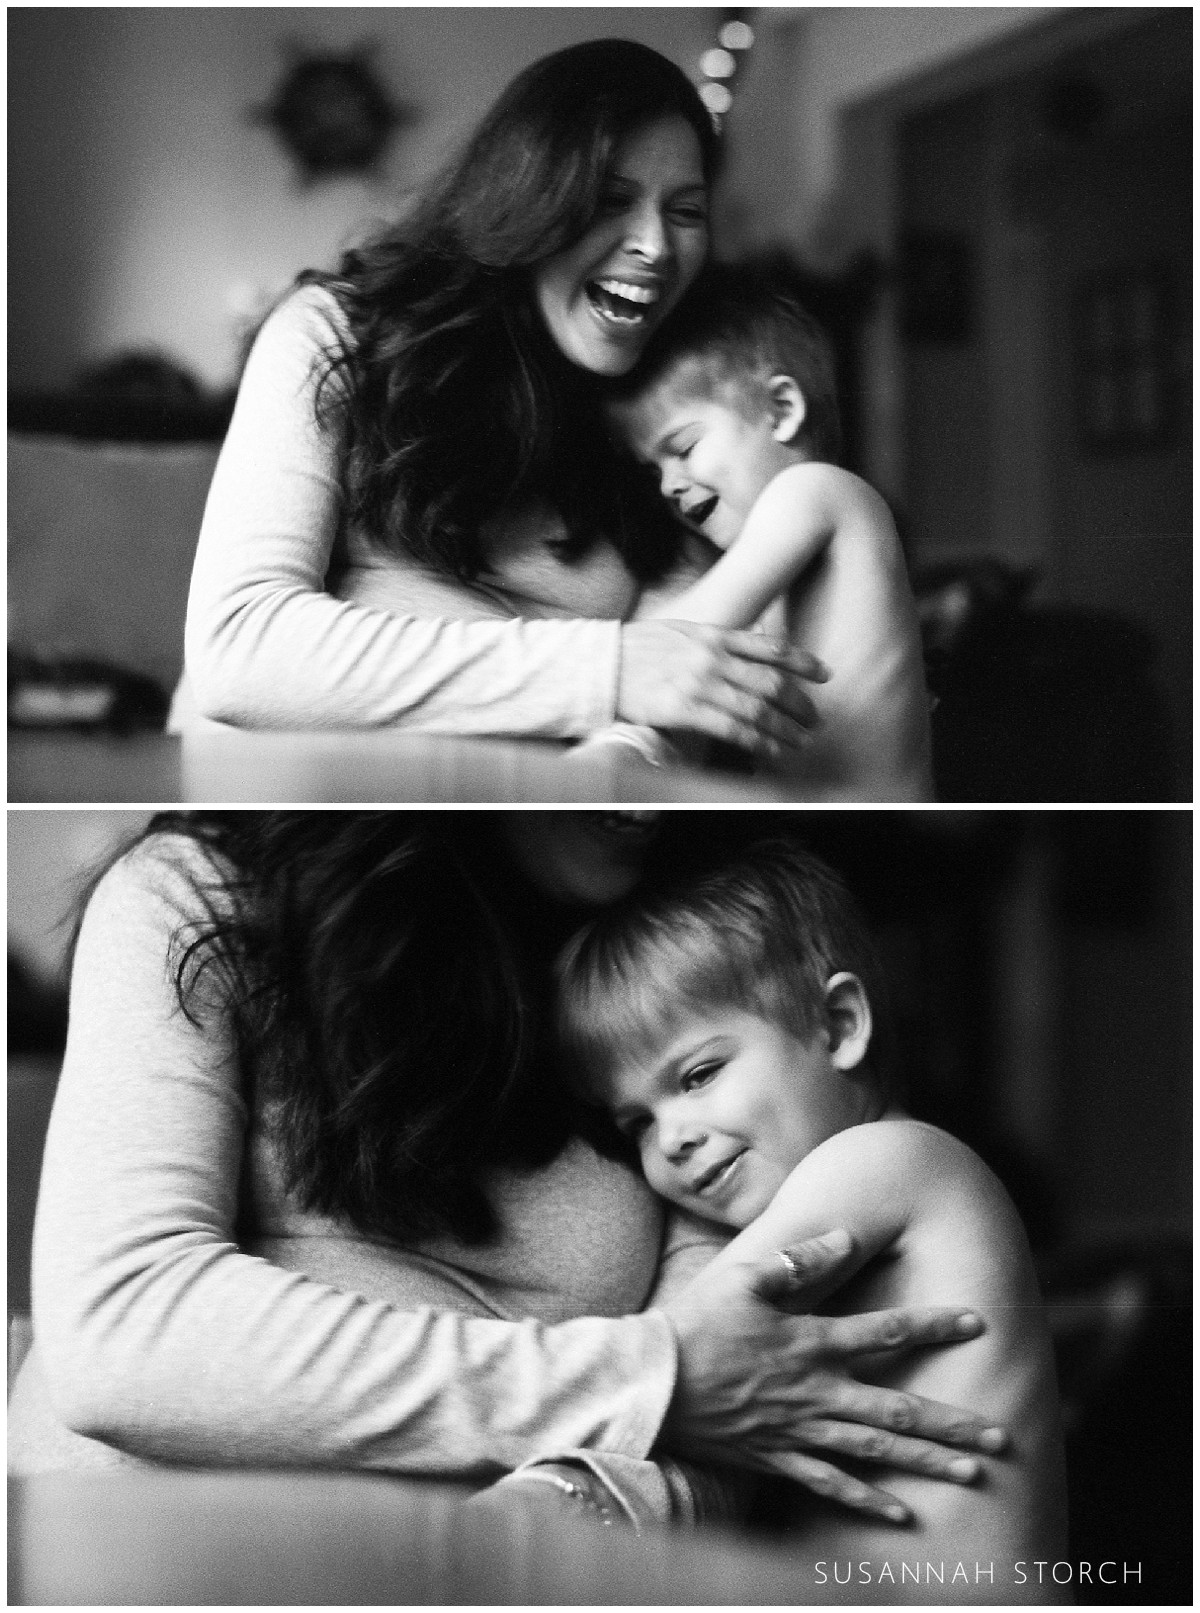 two film photography images of a mom and her young son snuggling